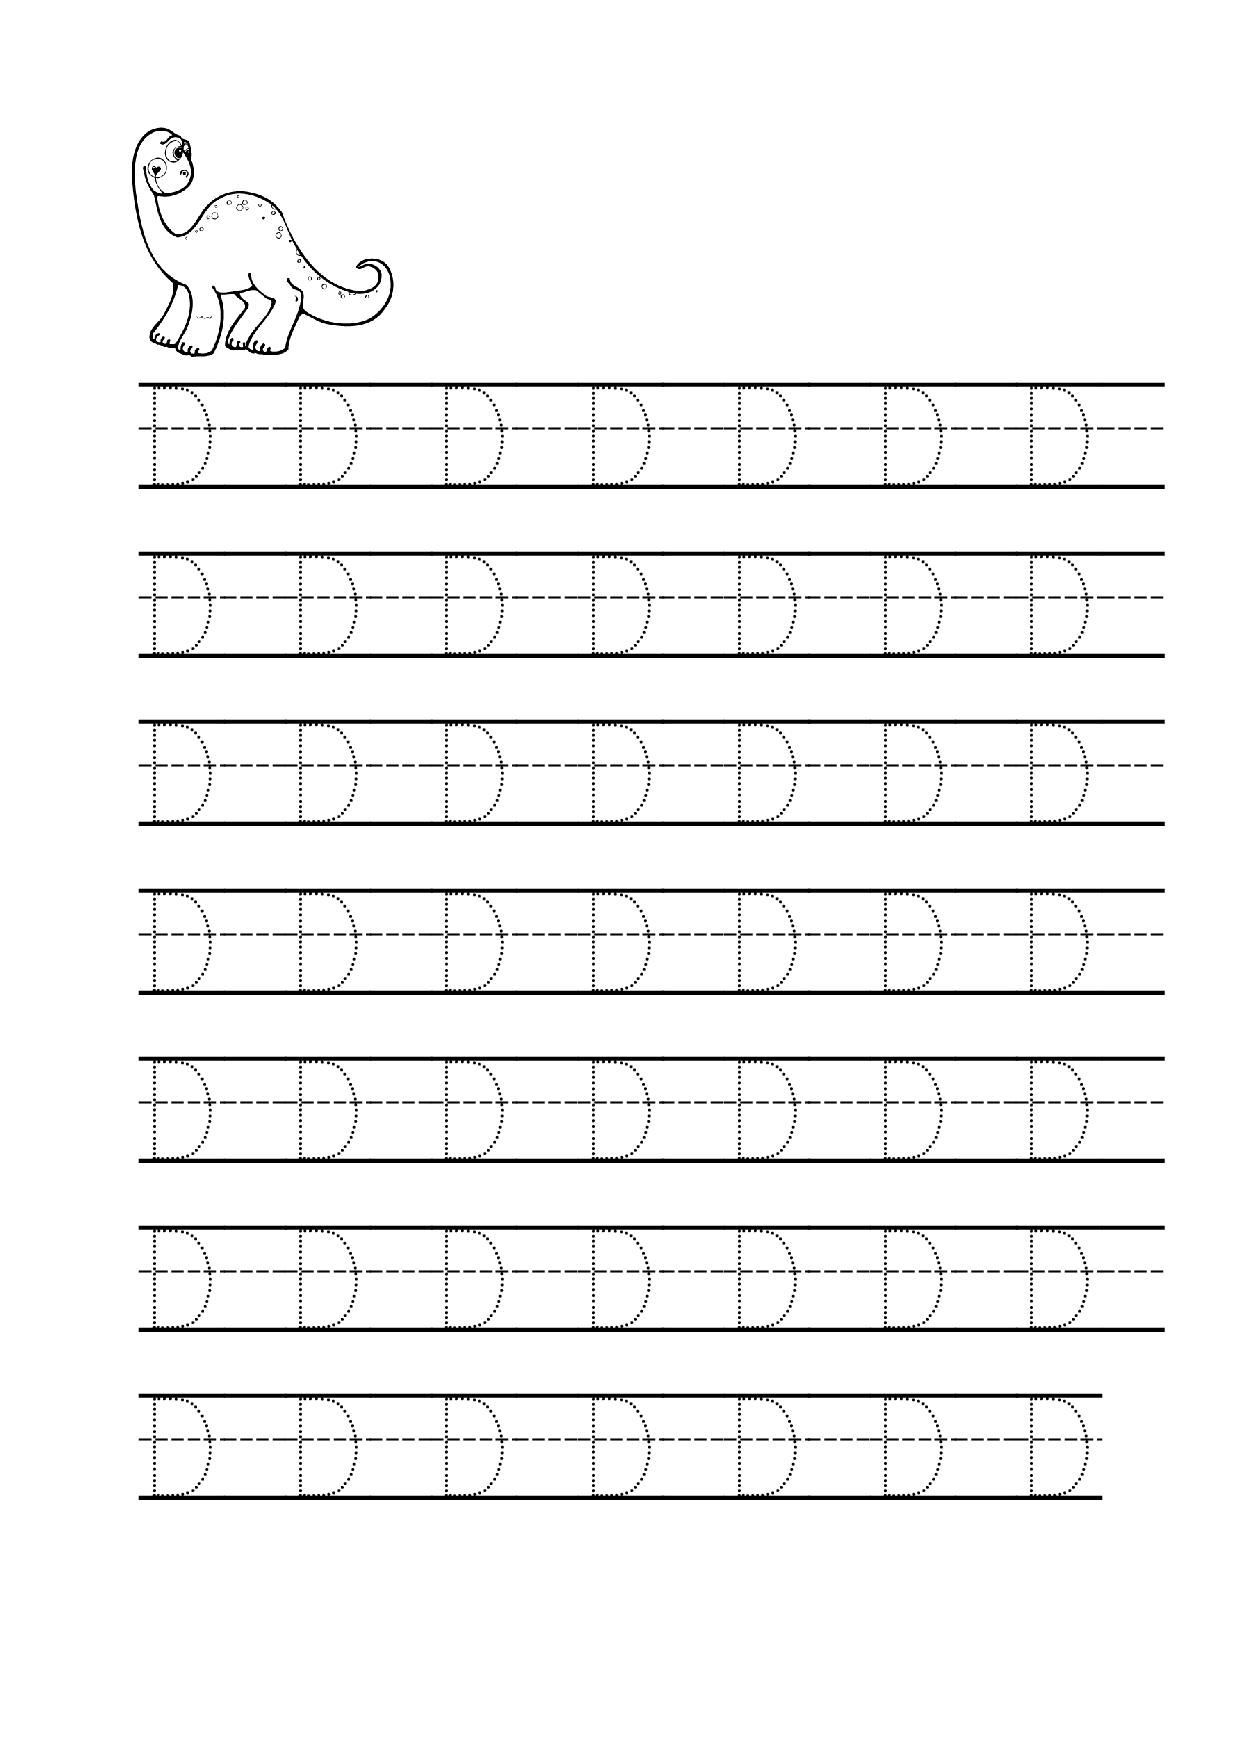 Tracing Letter D Worksheets For Preschool | Letter D pertaining to D Letter Tracing